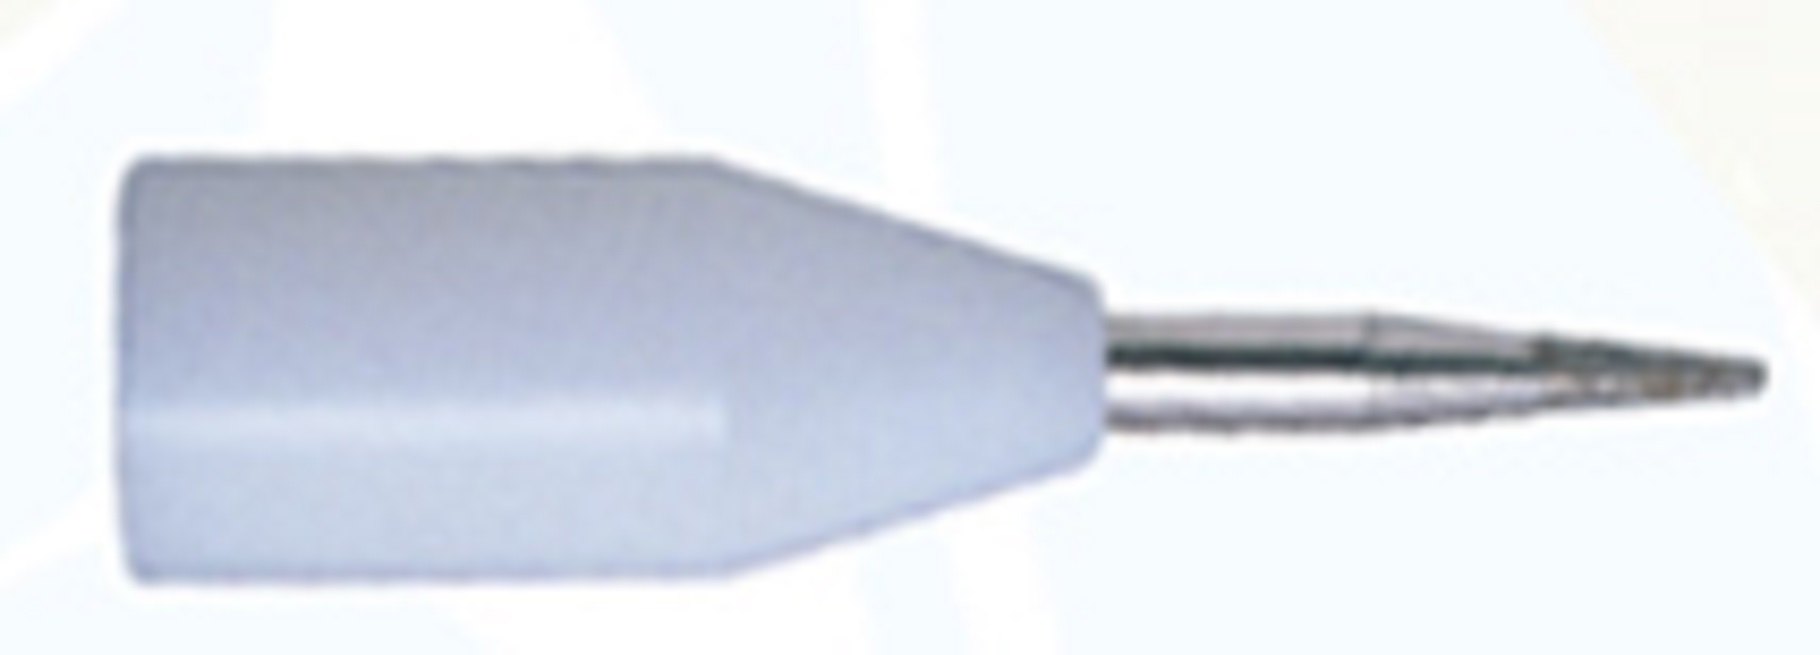 PLASTIC MANDREL LATHES for 3mm hole brushes right side - Click Image to Close